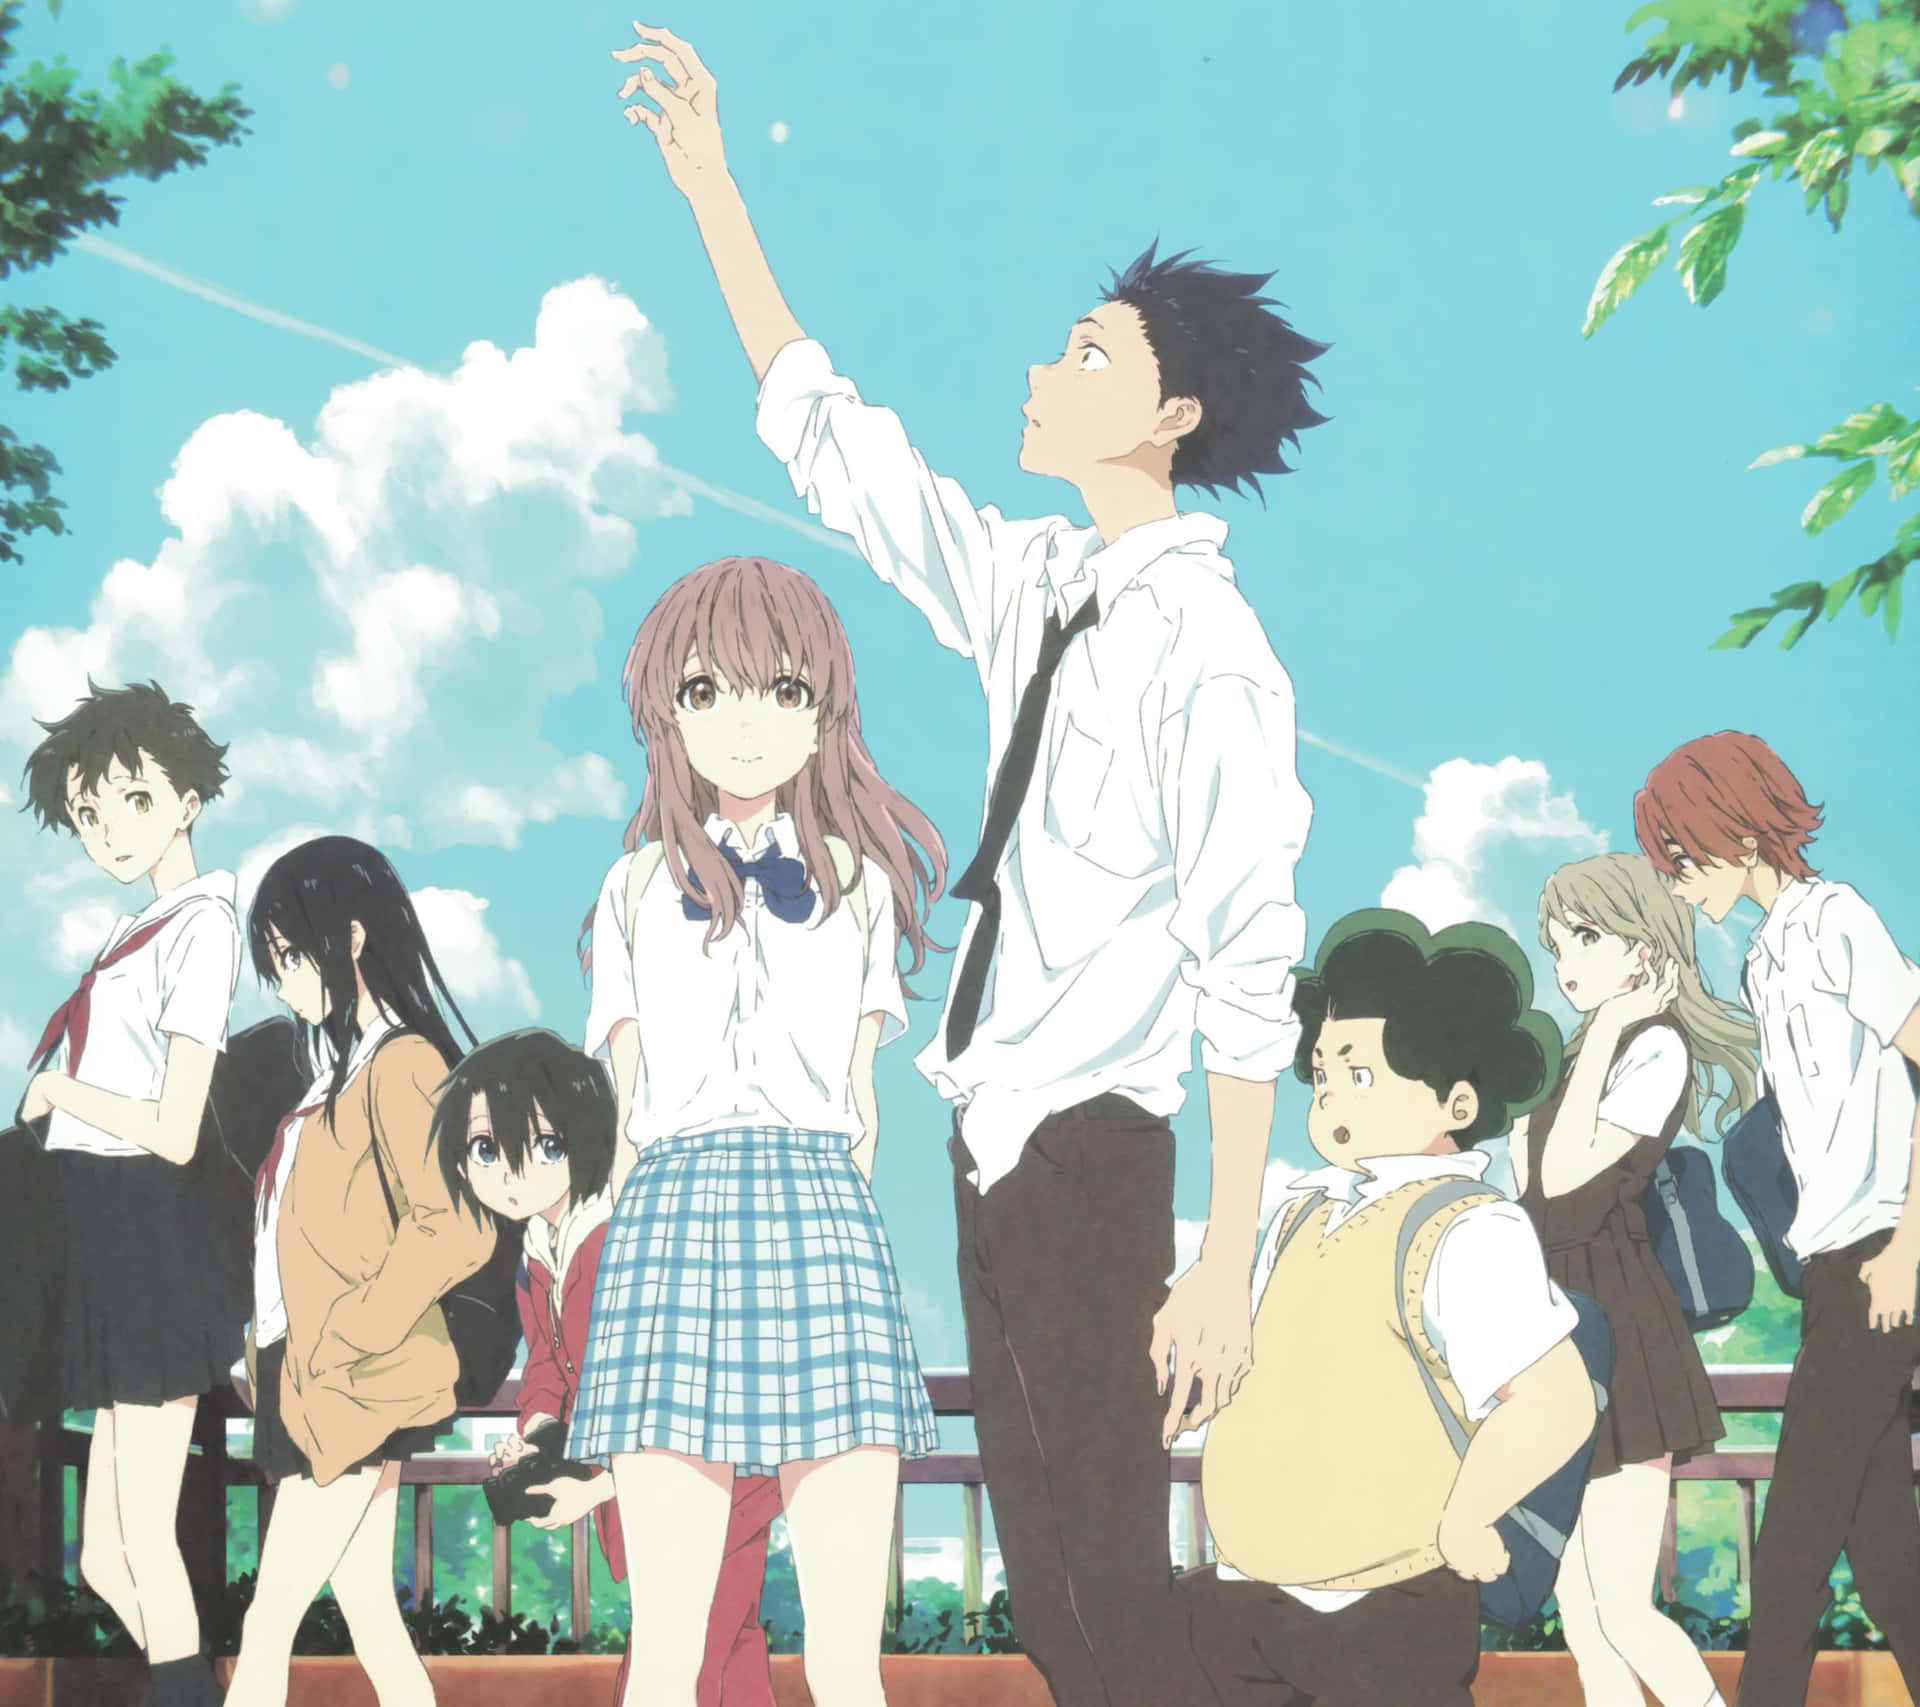 Moving Story of A Silent Voice